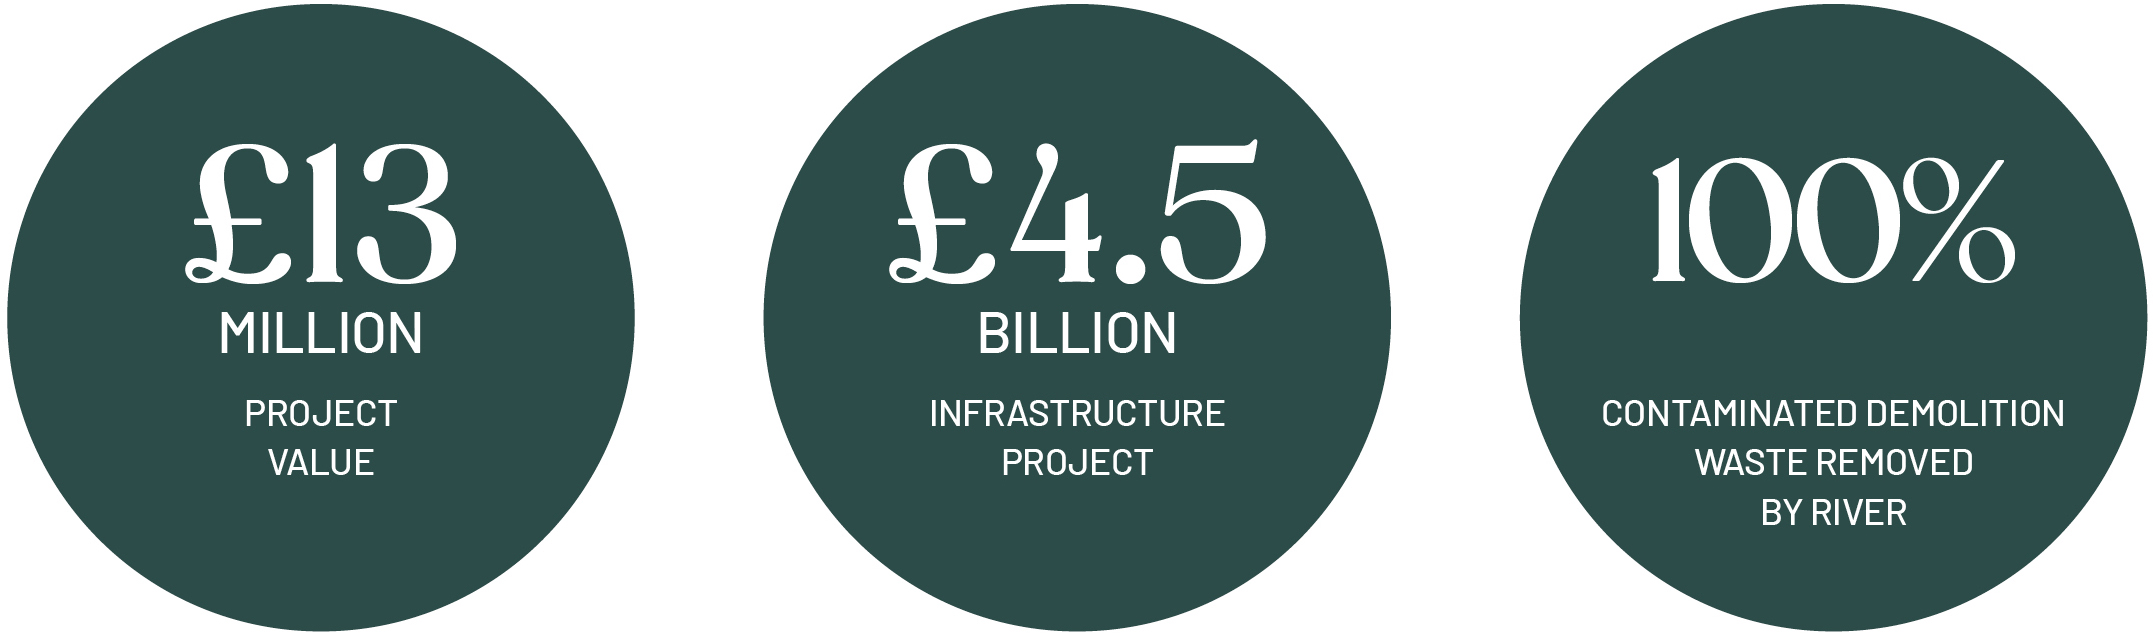 Project highlights graphic for Thames Tideway Tunnel project. £13 million project value, part of a £4.5 billion infrastructure project, 100% of contaminated demolition waste removed by river boat.